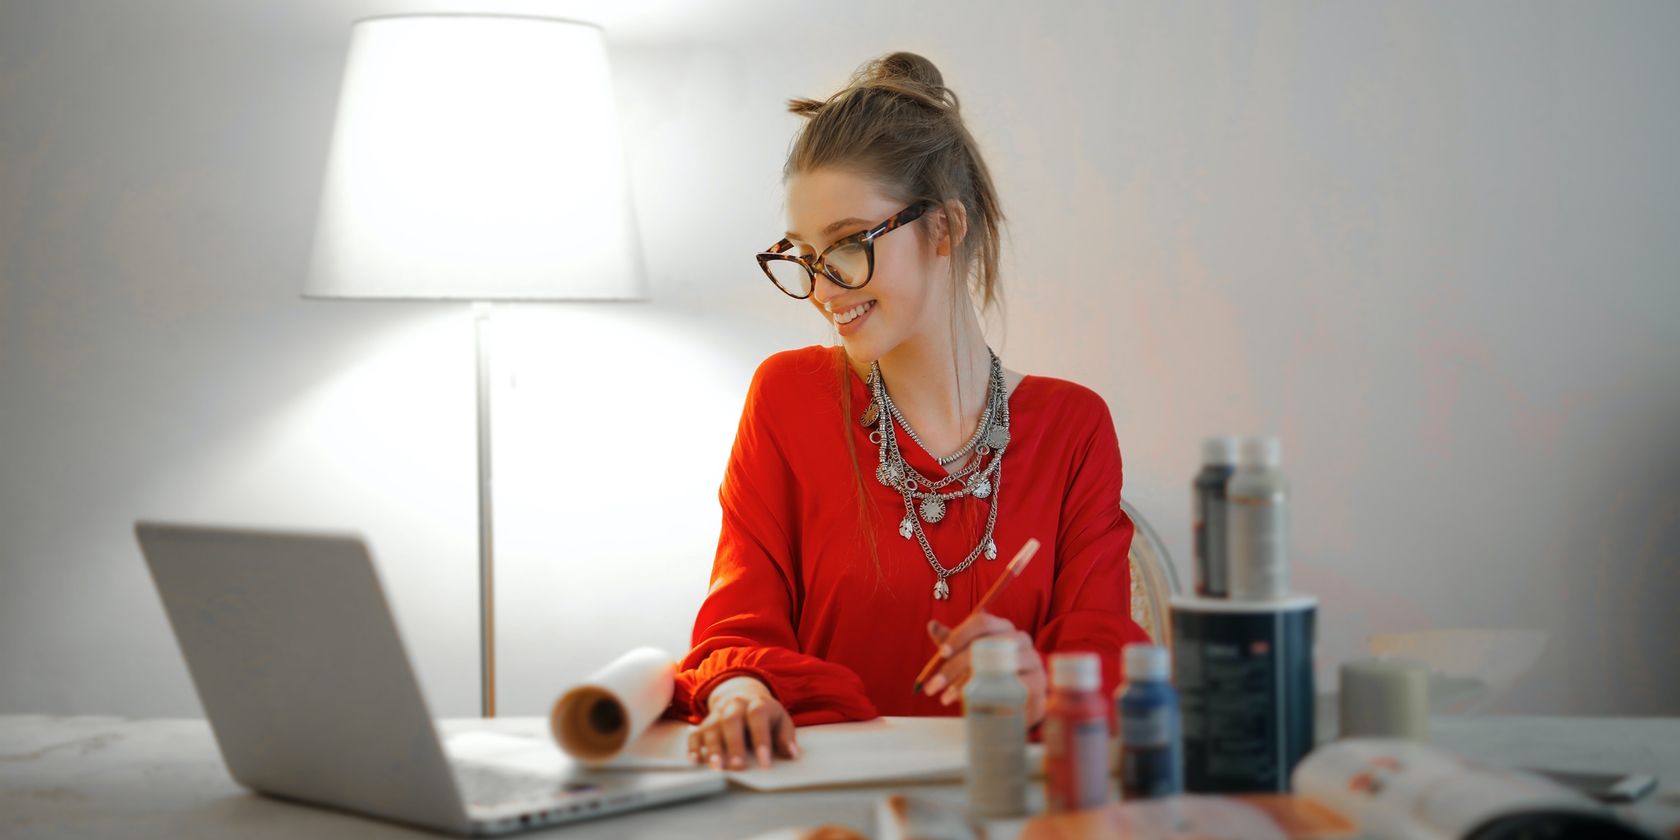 Woman With Red Shirt Smiling on Laptop Sitting On Desk